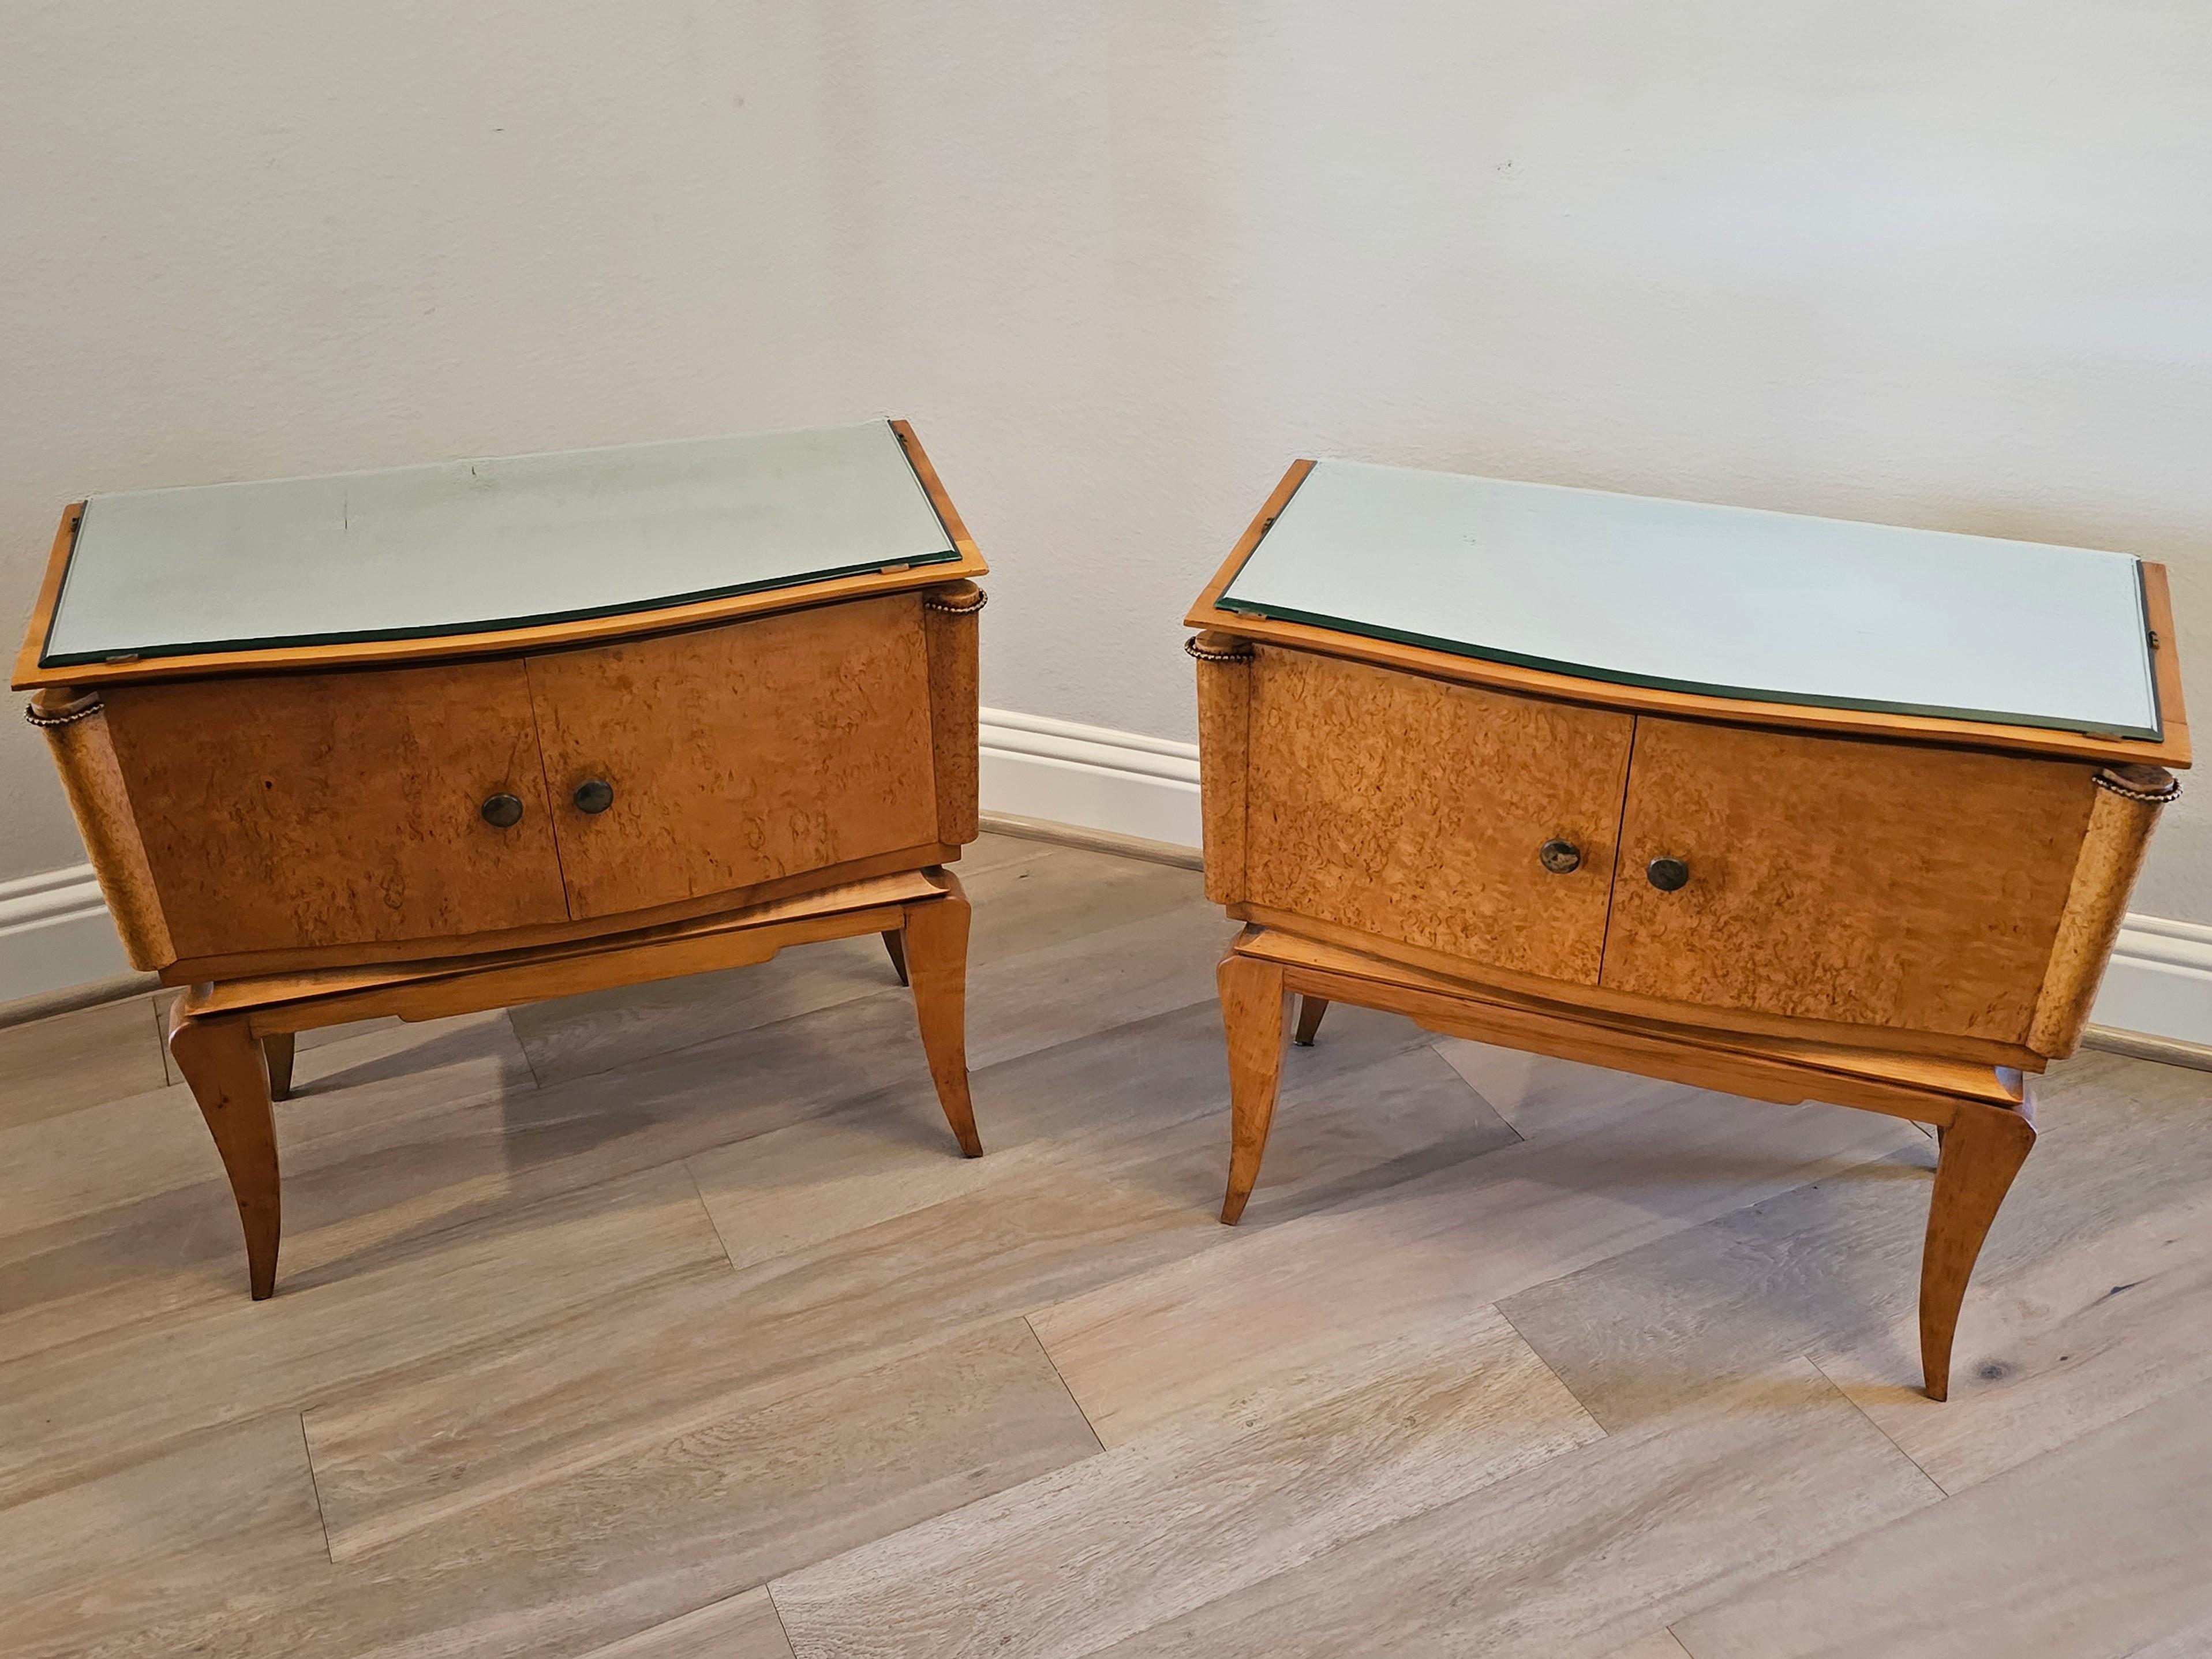 A fabulous pair of original French Modernist burlwood bedside cabinets (nightstands or end tables). circa 1950s/early 1960s

Each retaining the original shaped mirrored top with beveled edge, over conforming solid wood case in richly figured